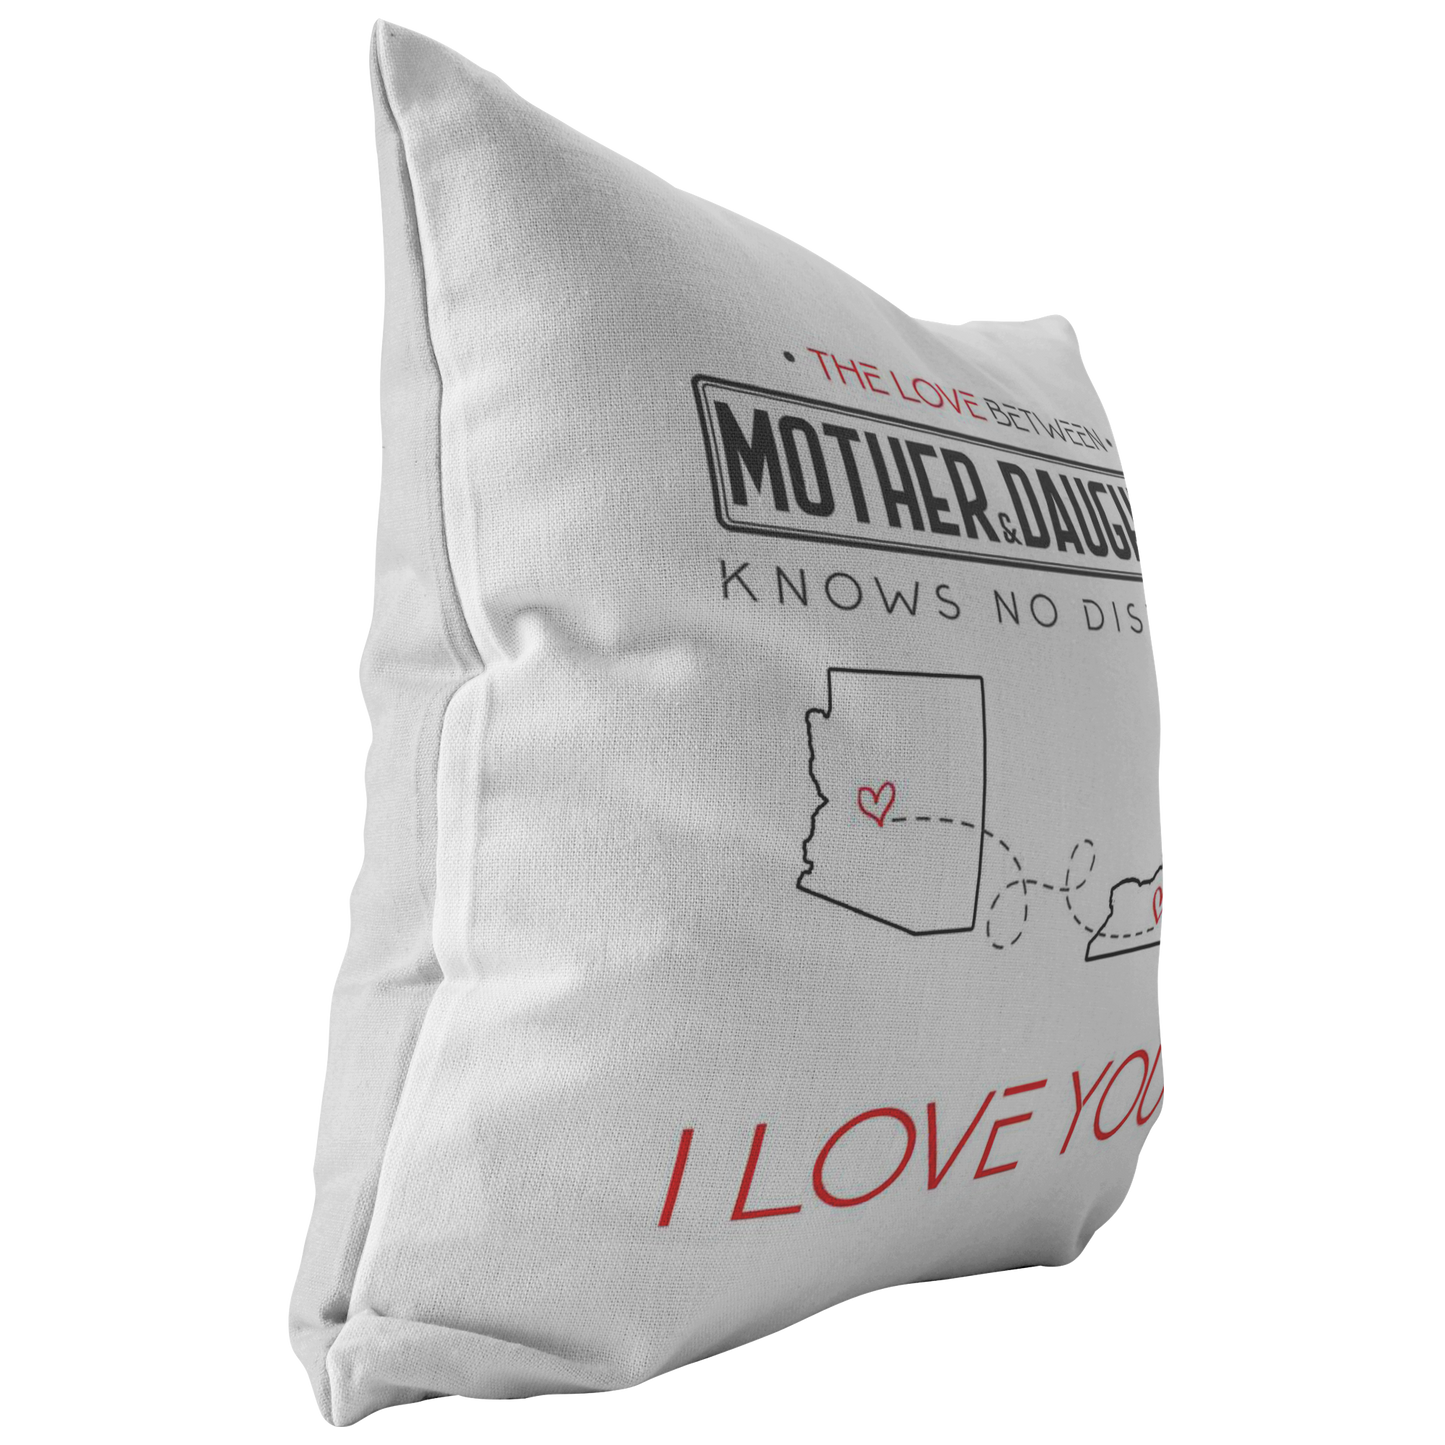 ND-pl20419438-sp-30561 - [ Arizona | New York | Mother And Daughter ] (PI_ThrowPillowCovers) Happy Farhers Day, Mothers Day Decoration Personalized - The